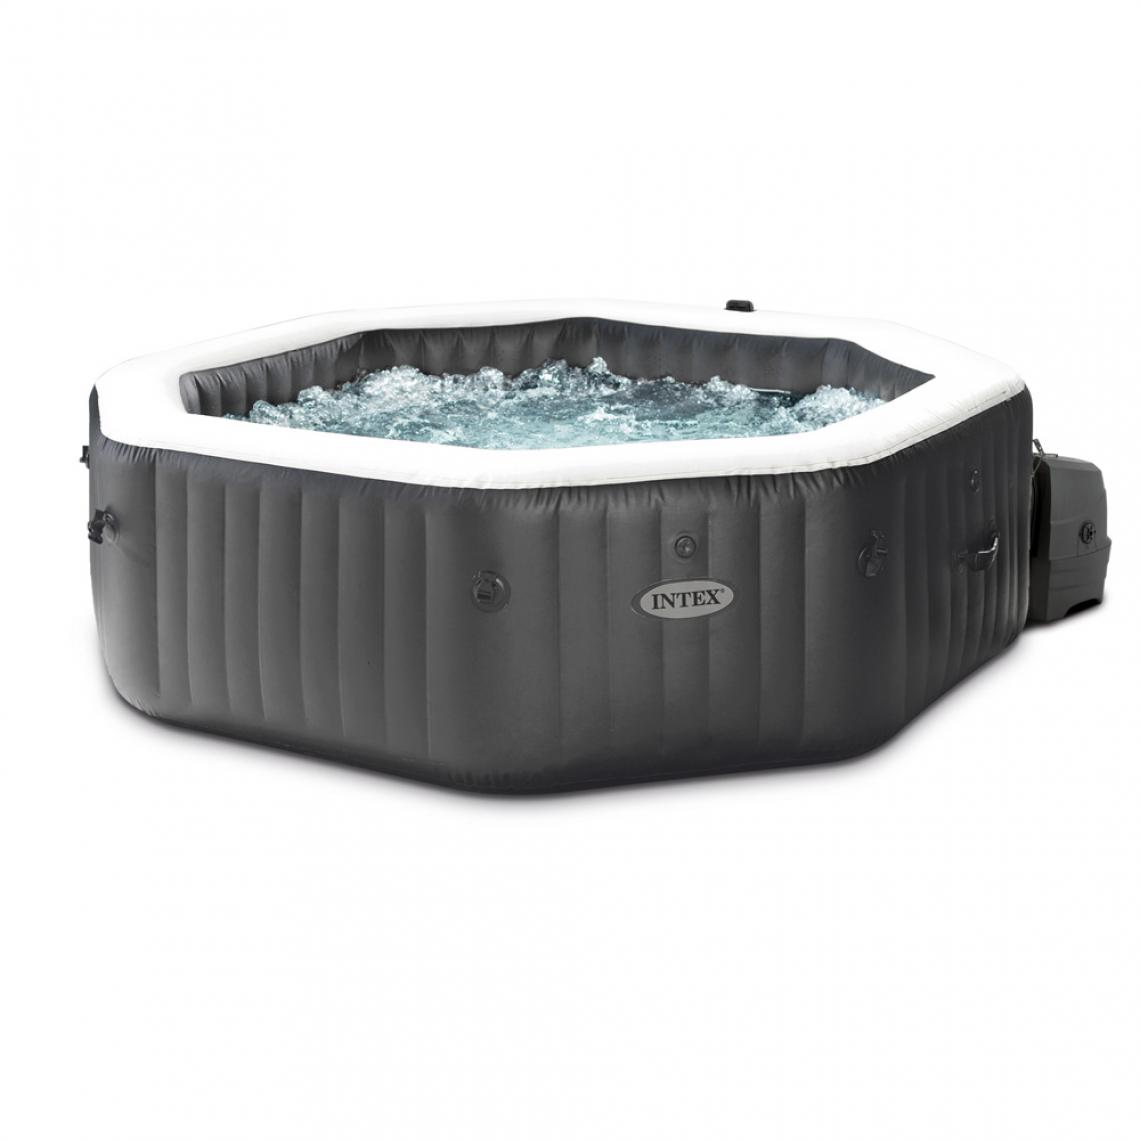 Intex - Spa gonflable Intex octogonal 4 places - Spa gonflable